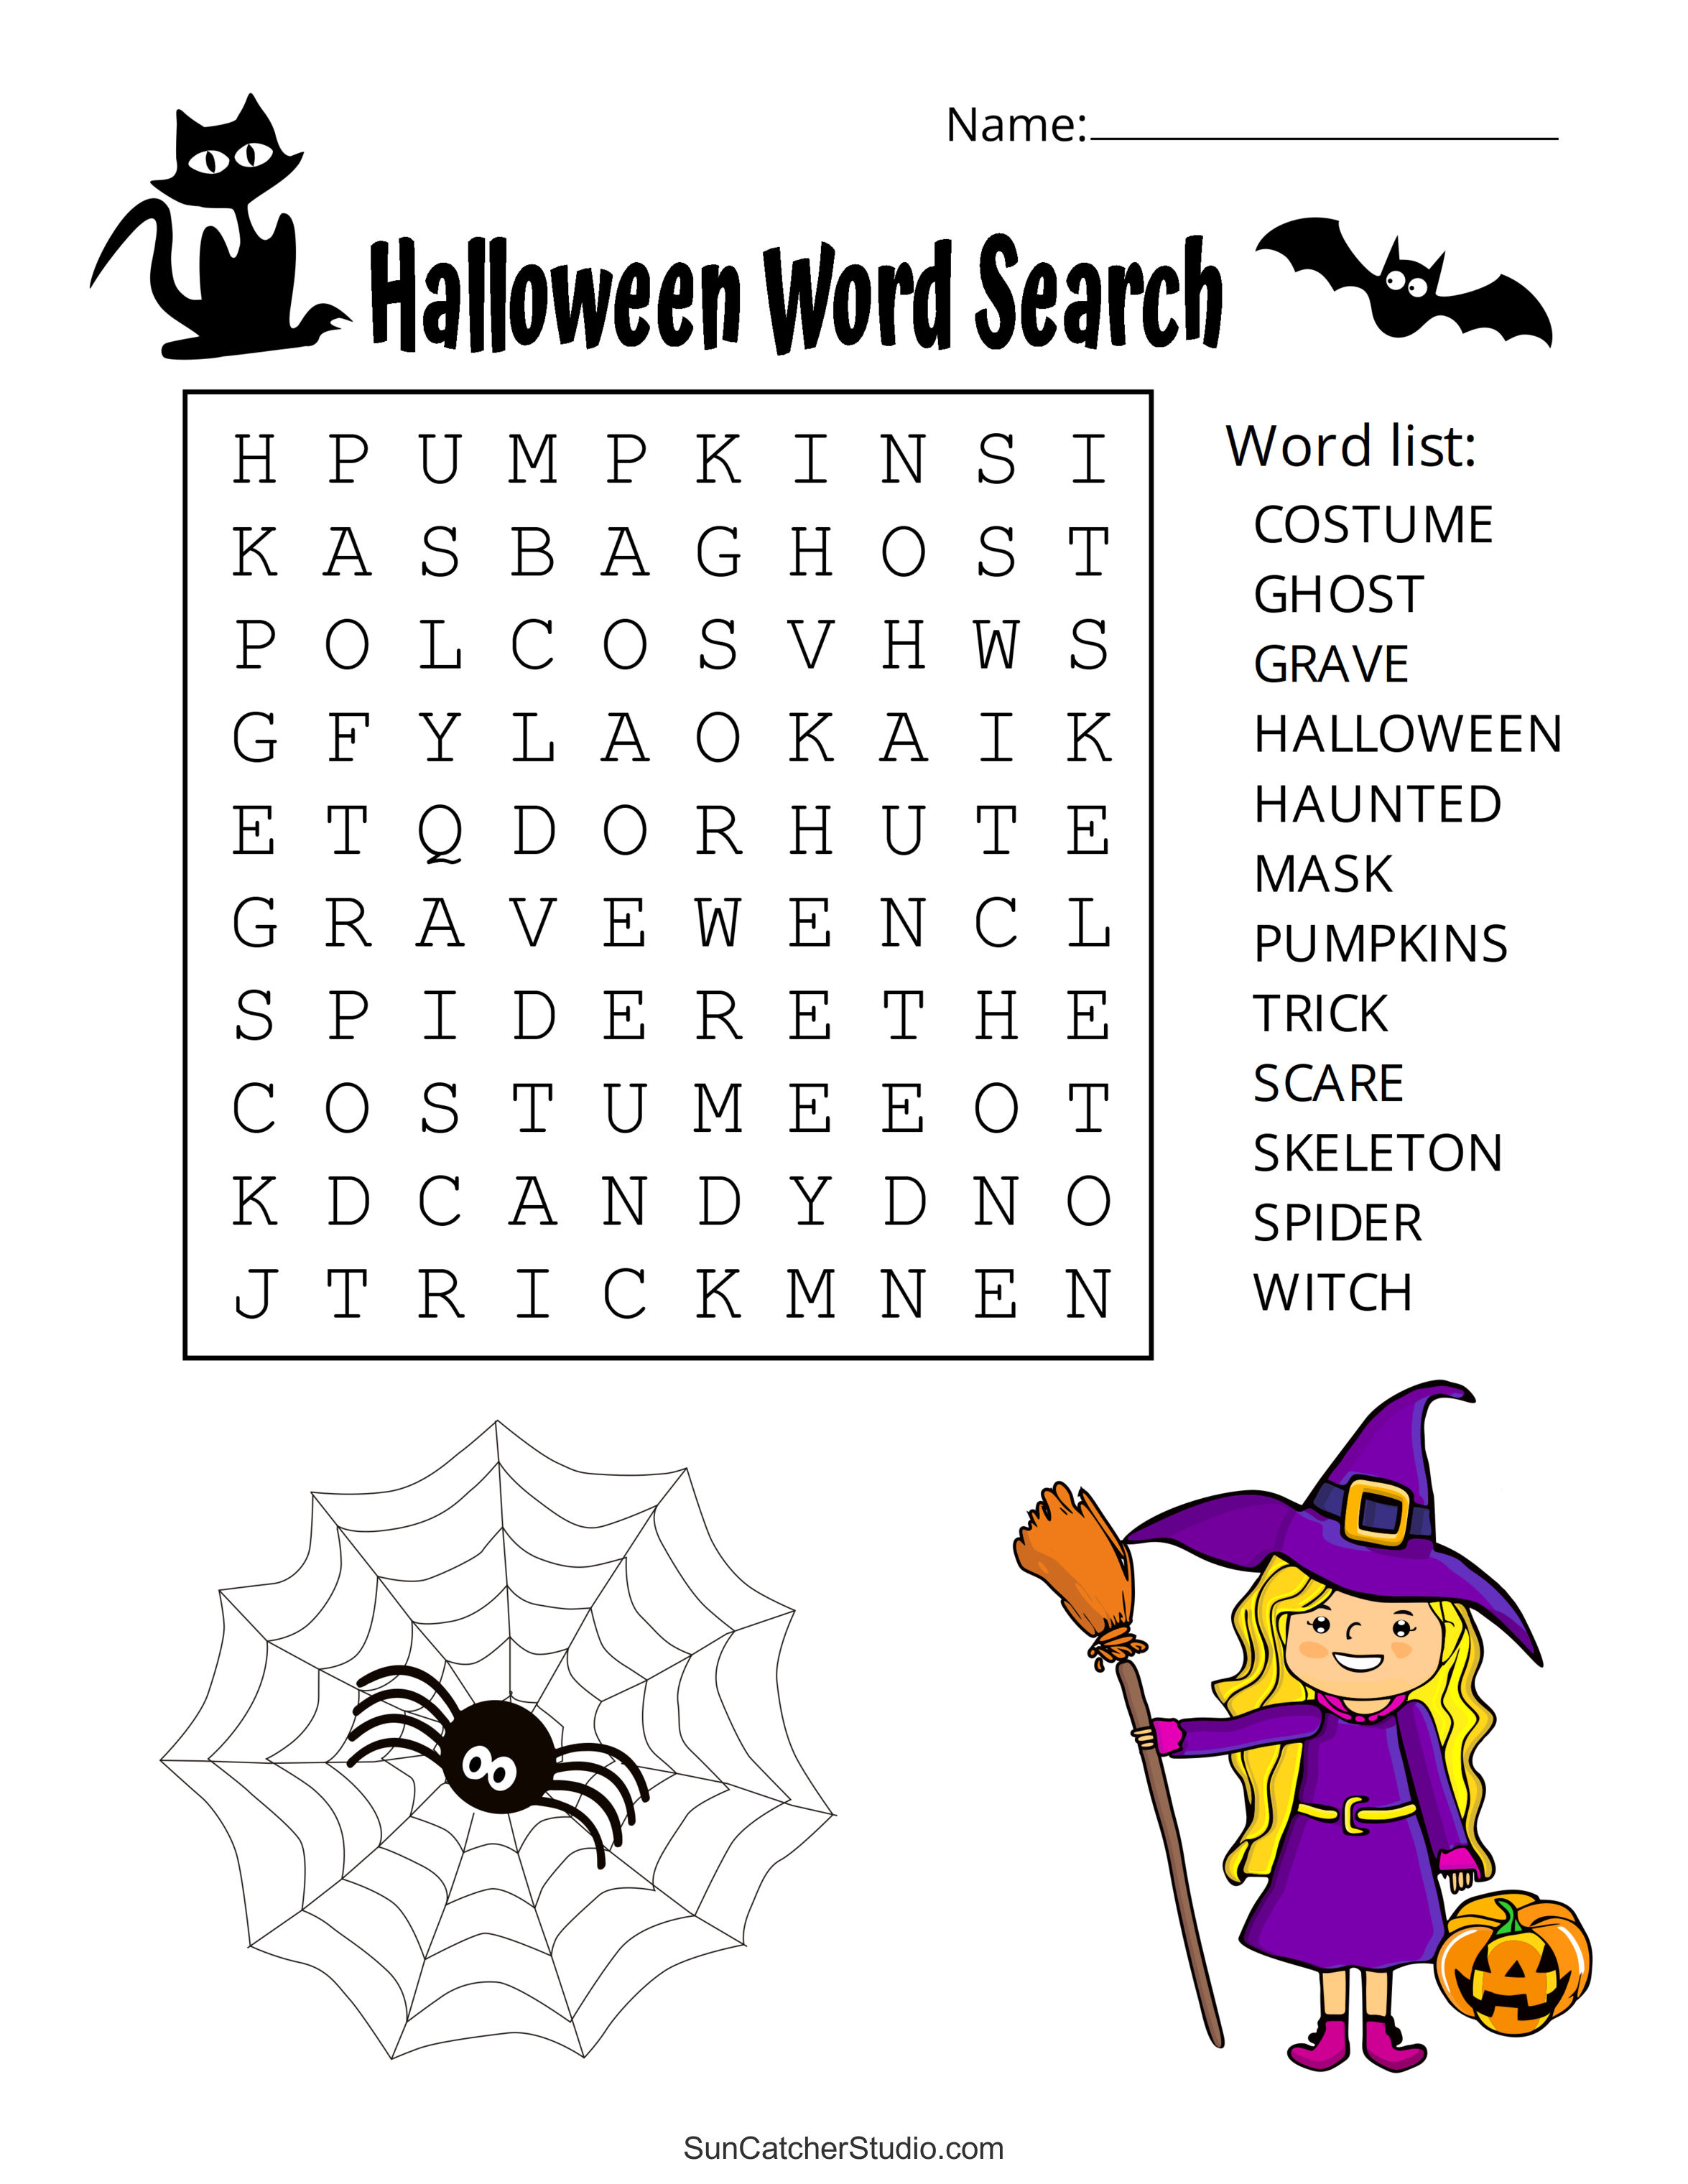 Halloween Word Search Free Printable Puzzles DIY Projects Patterns Monograms Designs Templates